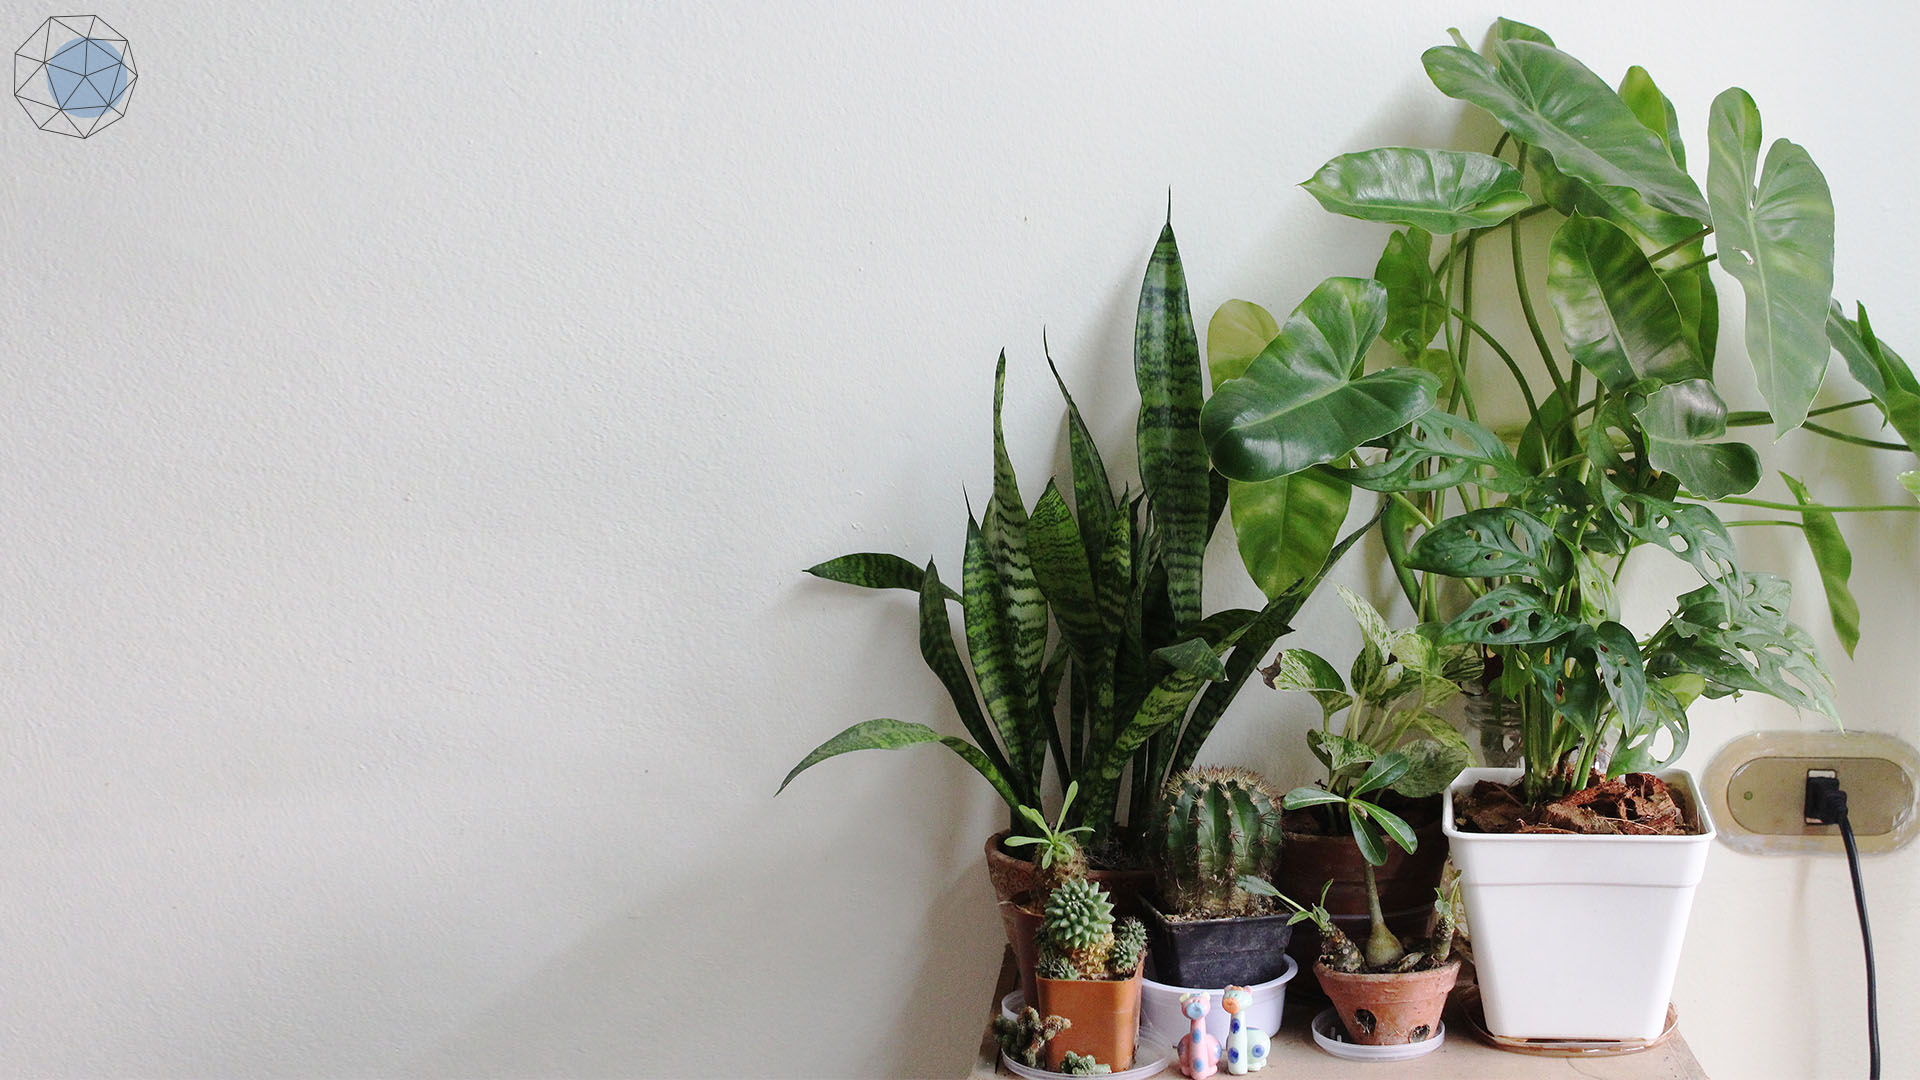 Plants planted in the house to help purify the air